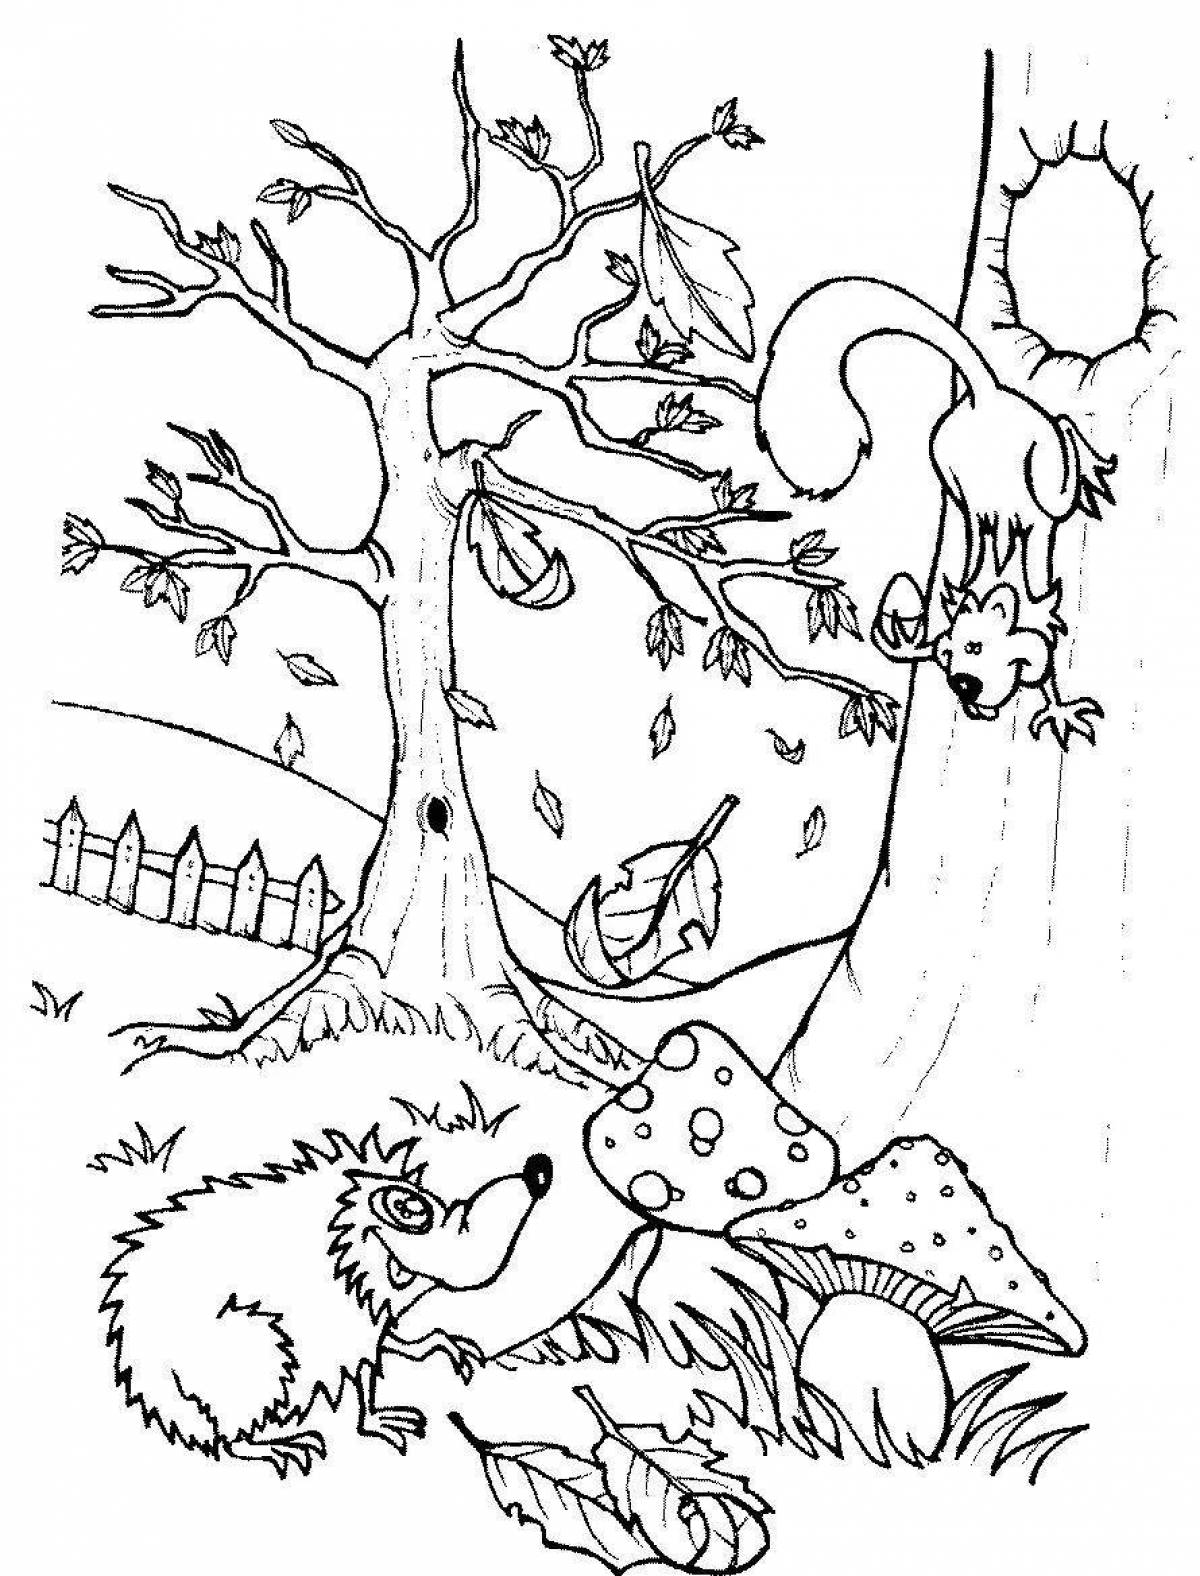 Delightful coloring pages animals in the forest